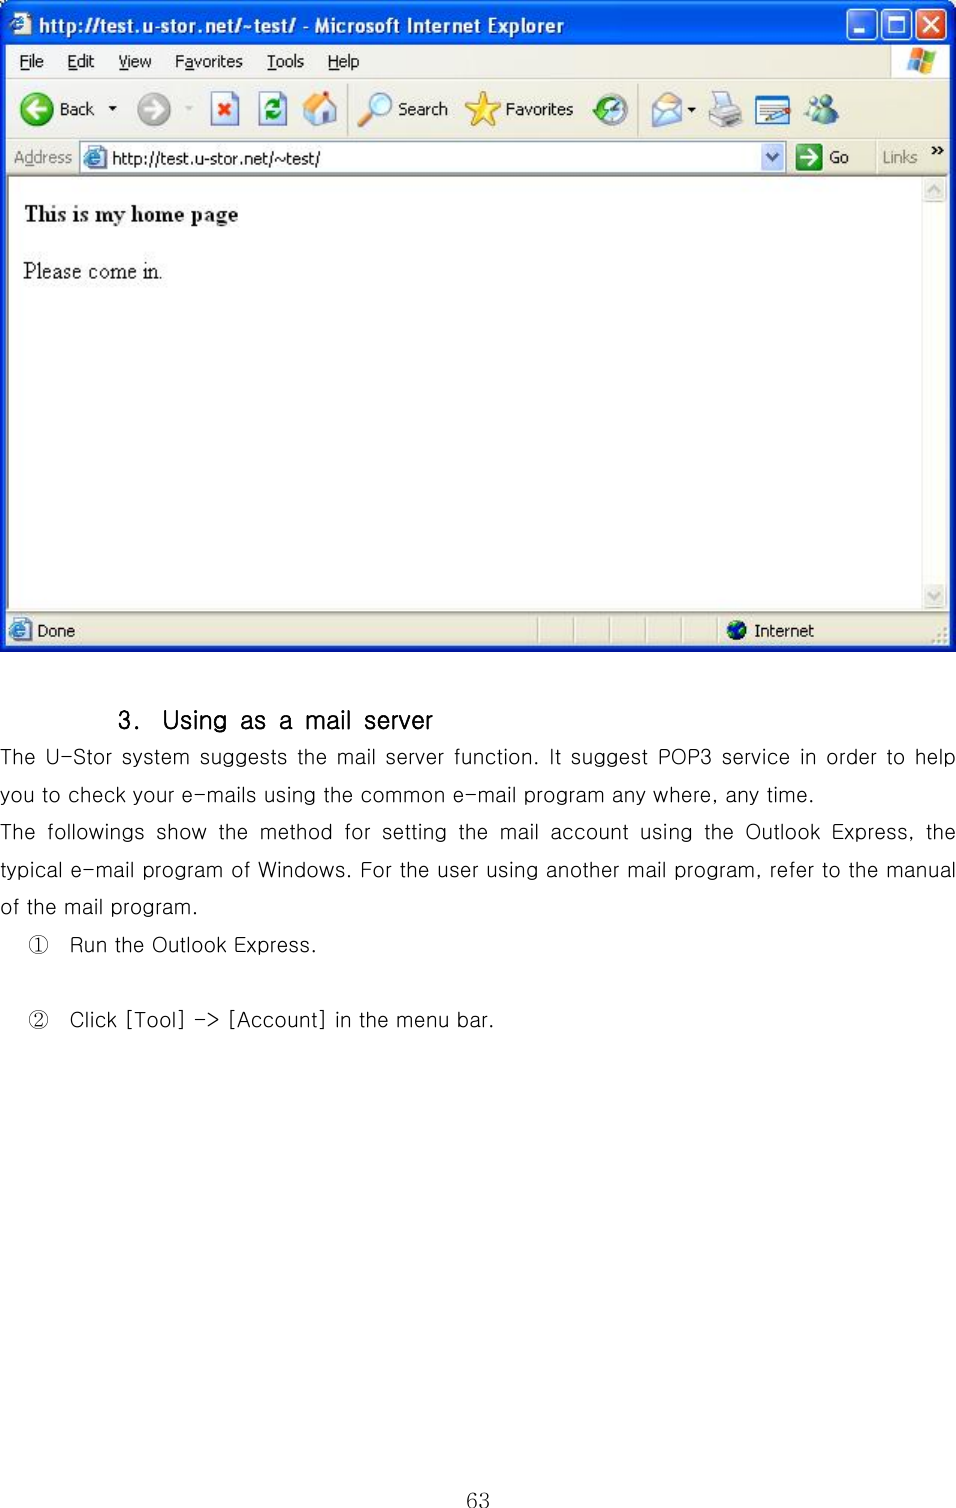  63  3.  Using as a mail server The U-Stor system  suggests the mail  server function. It  suggest POP3 service in order to help you to check your e-mails using the common e-mail program any where, any time.   The  followings  show  the  method  for  setting  the  mail  account  using the Outlook Express, the typical e-mail program of Windows. For the user using another mail program, refer to the manual of the mail program. ①  Run the Outlook Express. ②  Click [Tool] -&gt; [Account] in the menu bar. 